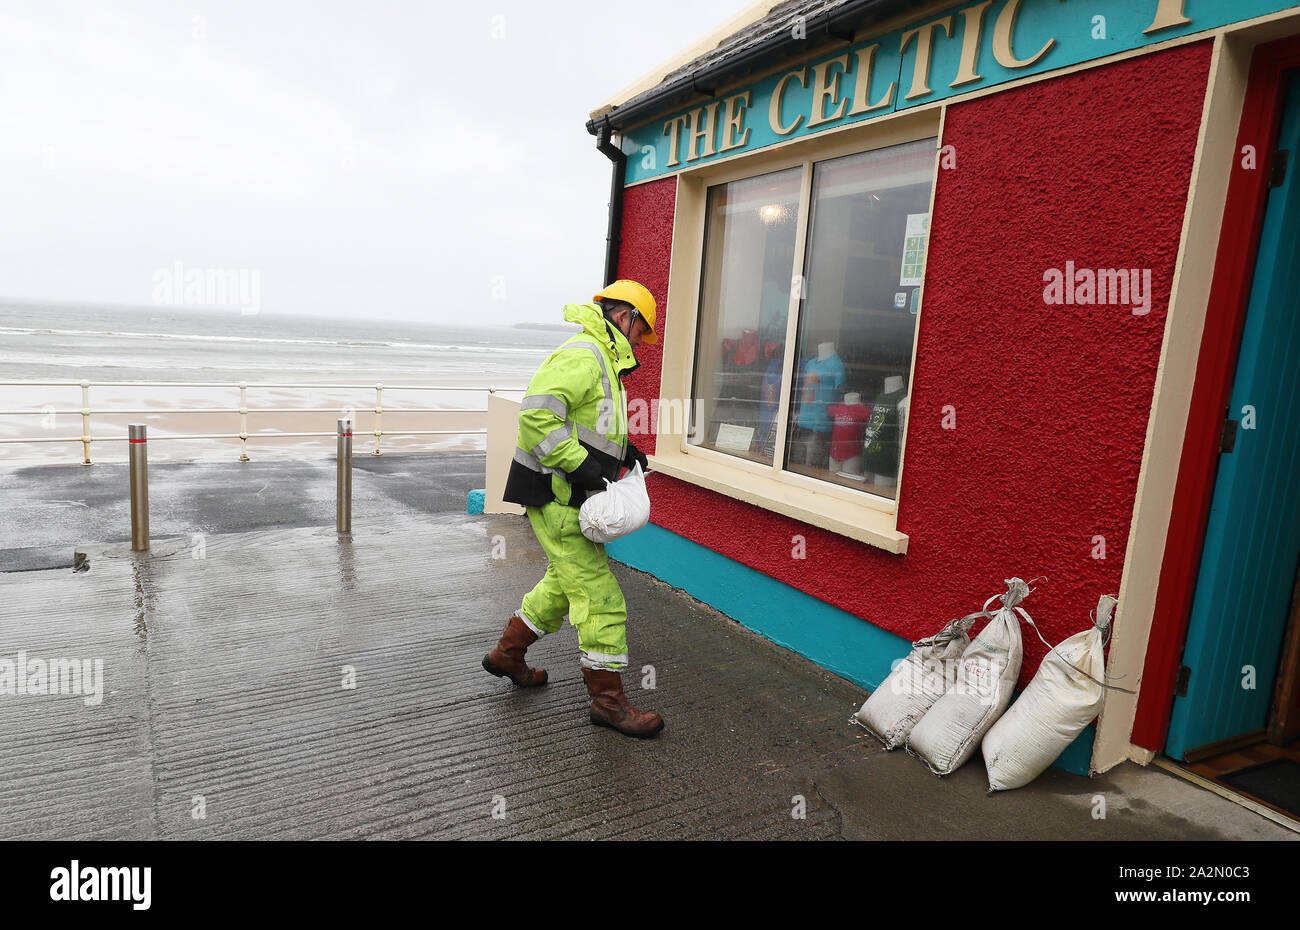 Members of Clare County council place sandbags at shops on the sea front in Lahinch, County Clare, on the West Coast of Ireland in preparation for storm Lorenzo, as a status orange wind warning and a yellow rain warning have been issued. Stock Photo